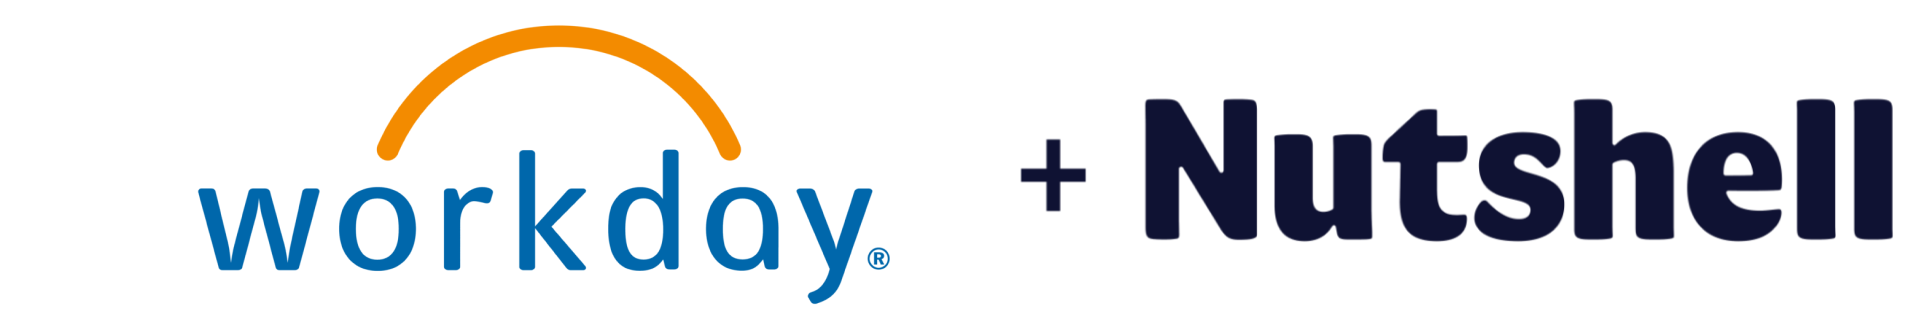 Workday and Nutshell logos integration graphic